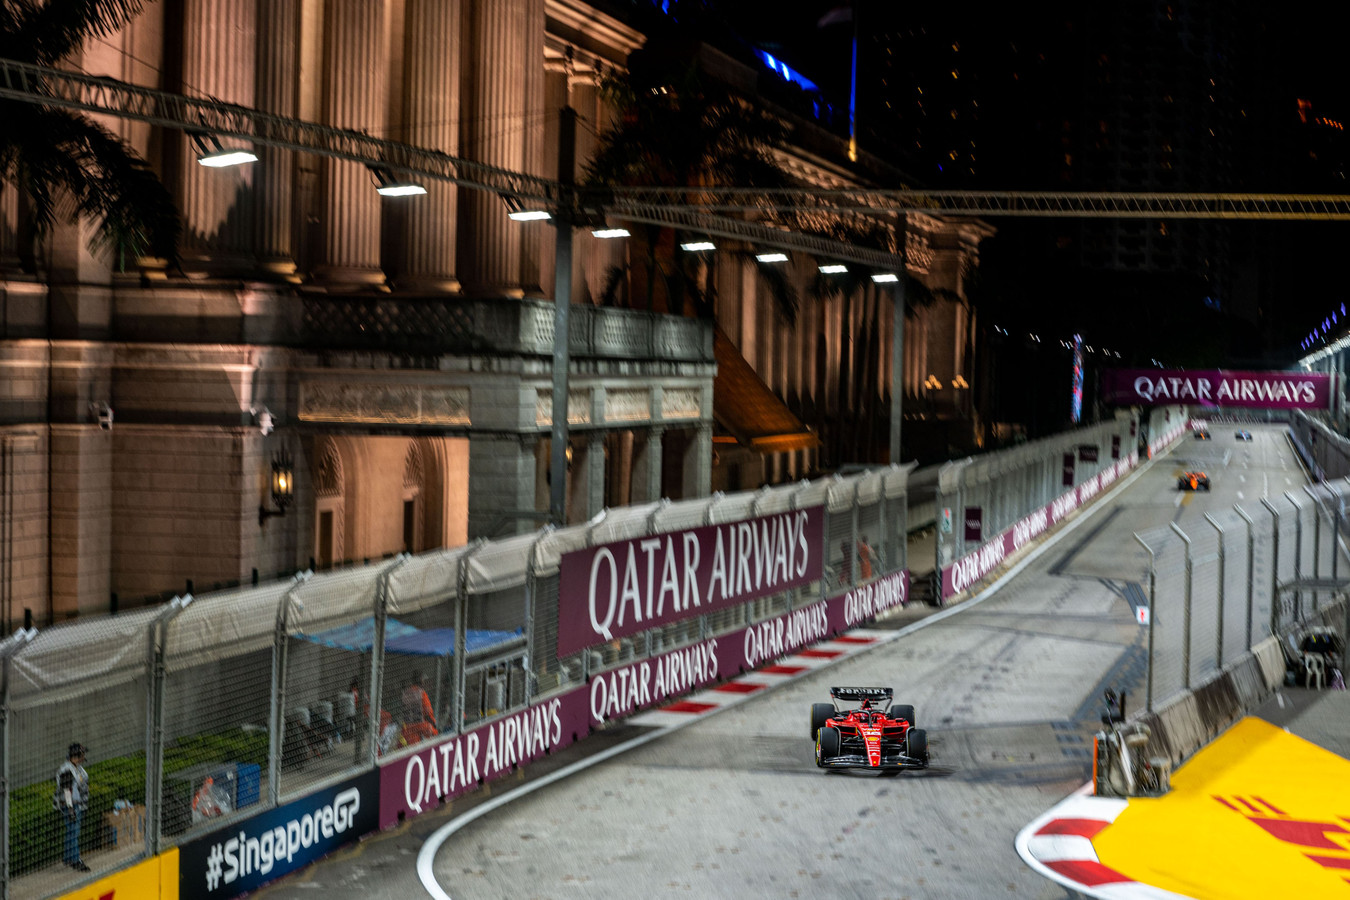 Charles Leclerc (16) runs practice laps in his Ferrari on the streets of Marina Bay ahead of the Formula 1 Singapore Grand Prix